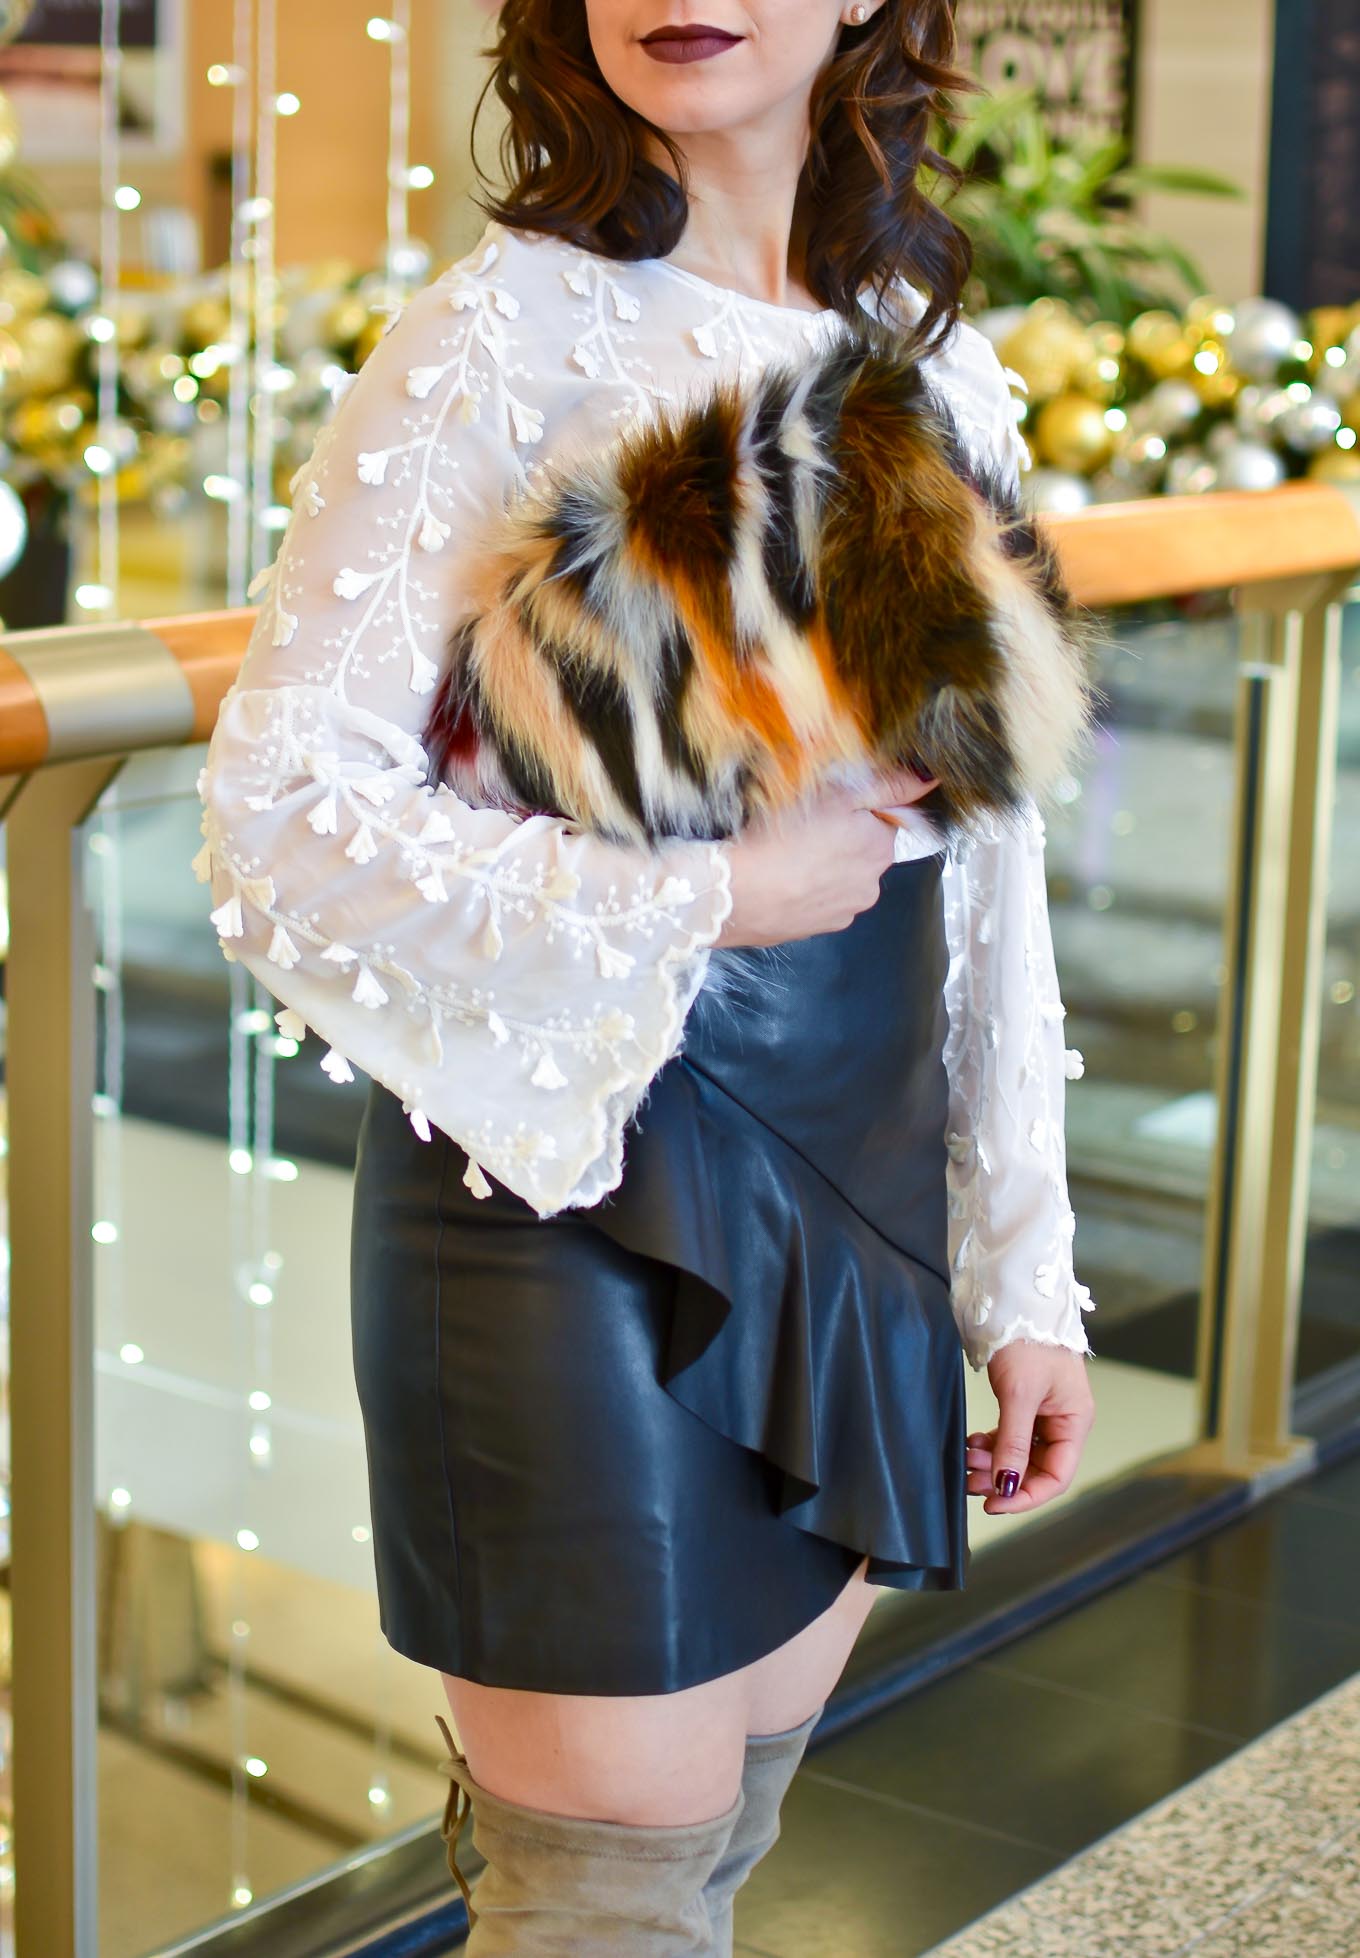 Lifestyle blogger Roxanne of Glass of Glam wearing a faux leather skirt, Shein embroidered blouse, faux fur clutch, and Steve Madden boots - Golden Birthday Wisdom by popular Chicago fashion blogger Glass of Glam